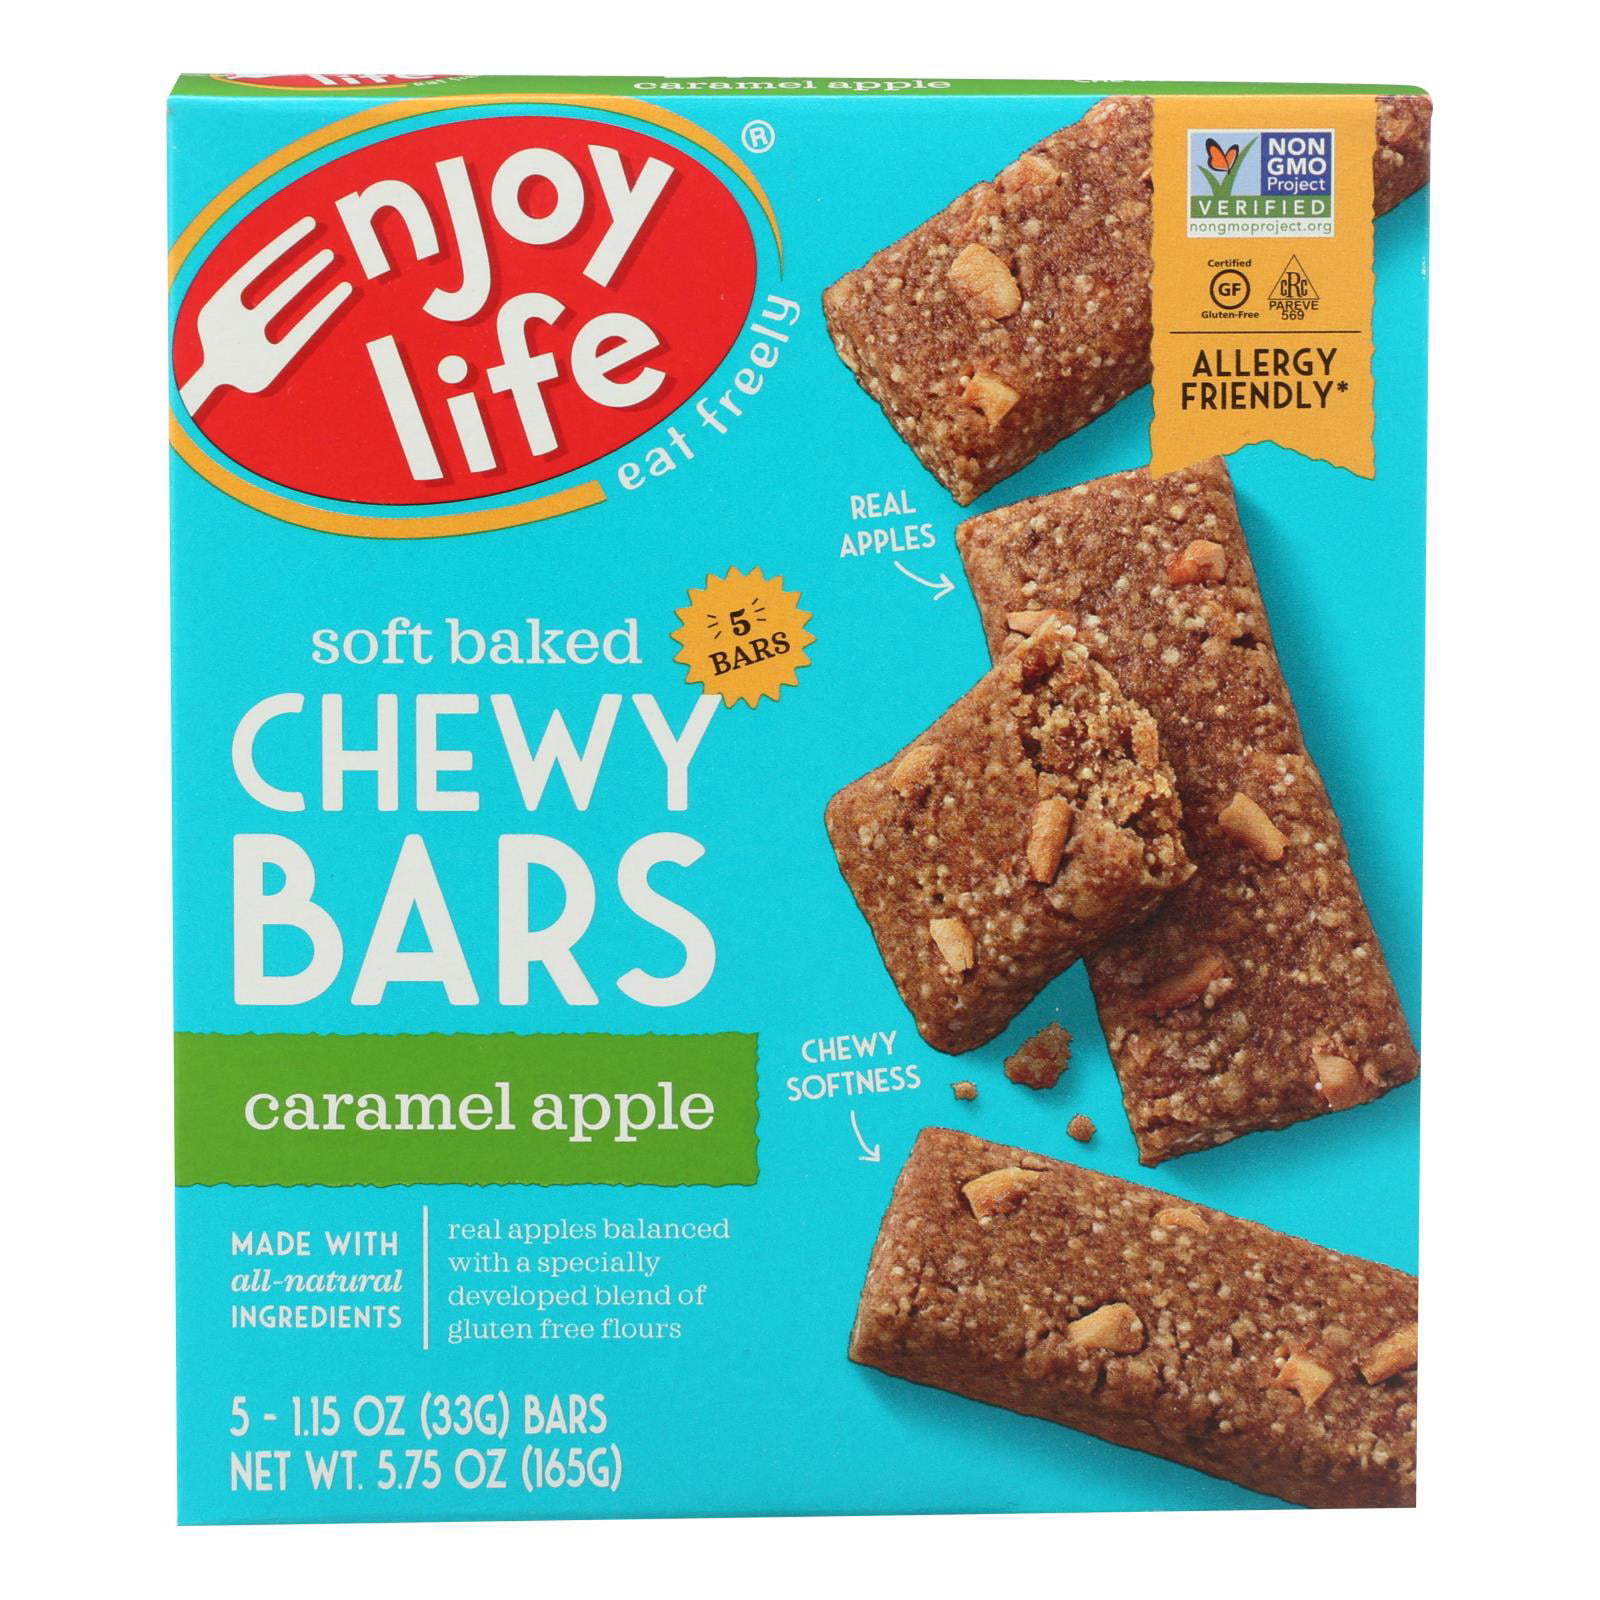 Pack of 6 Grocery Enjoy Life Caramel Apple Chewy Bars 